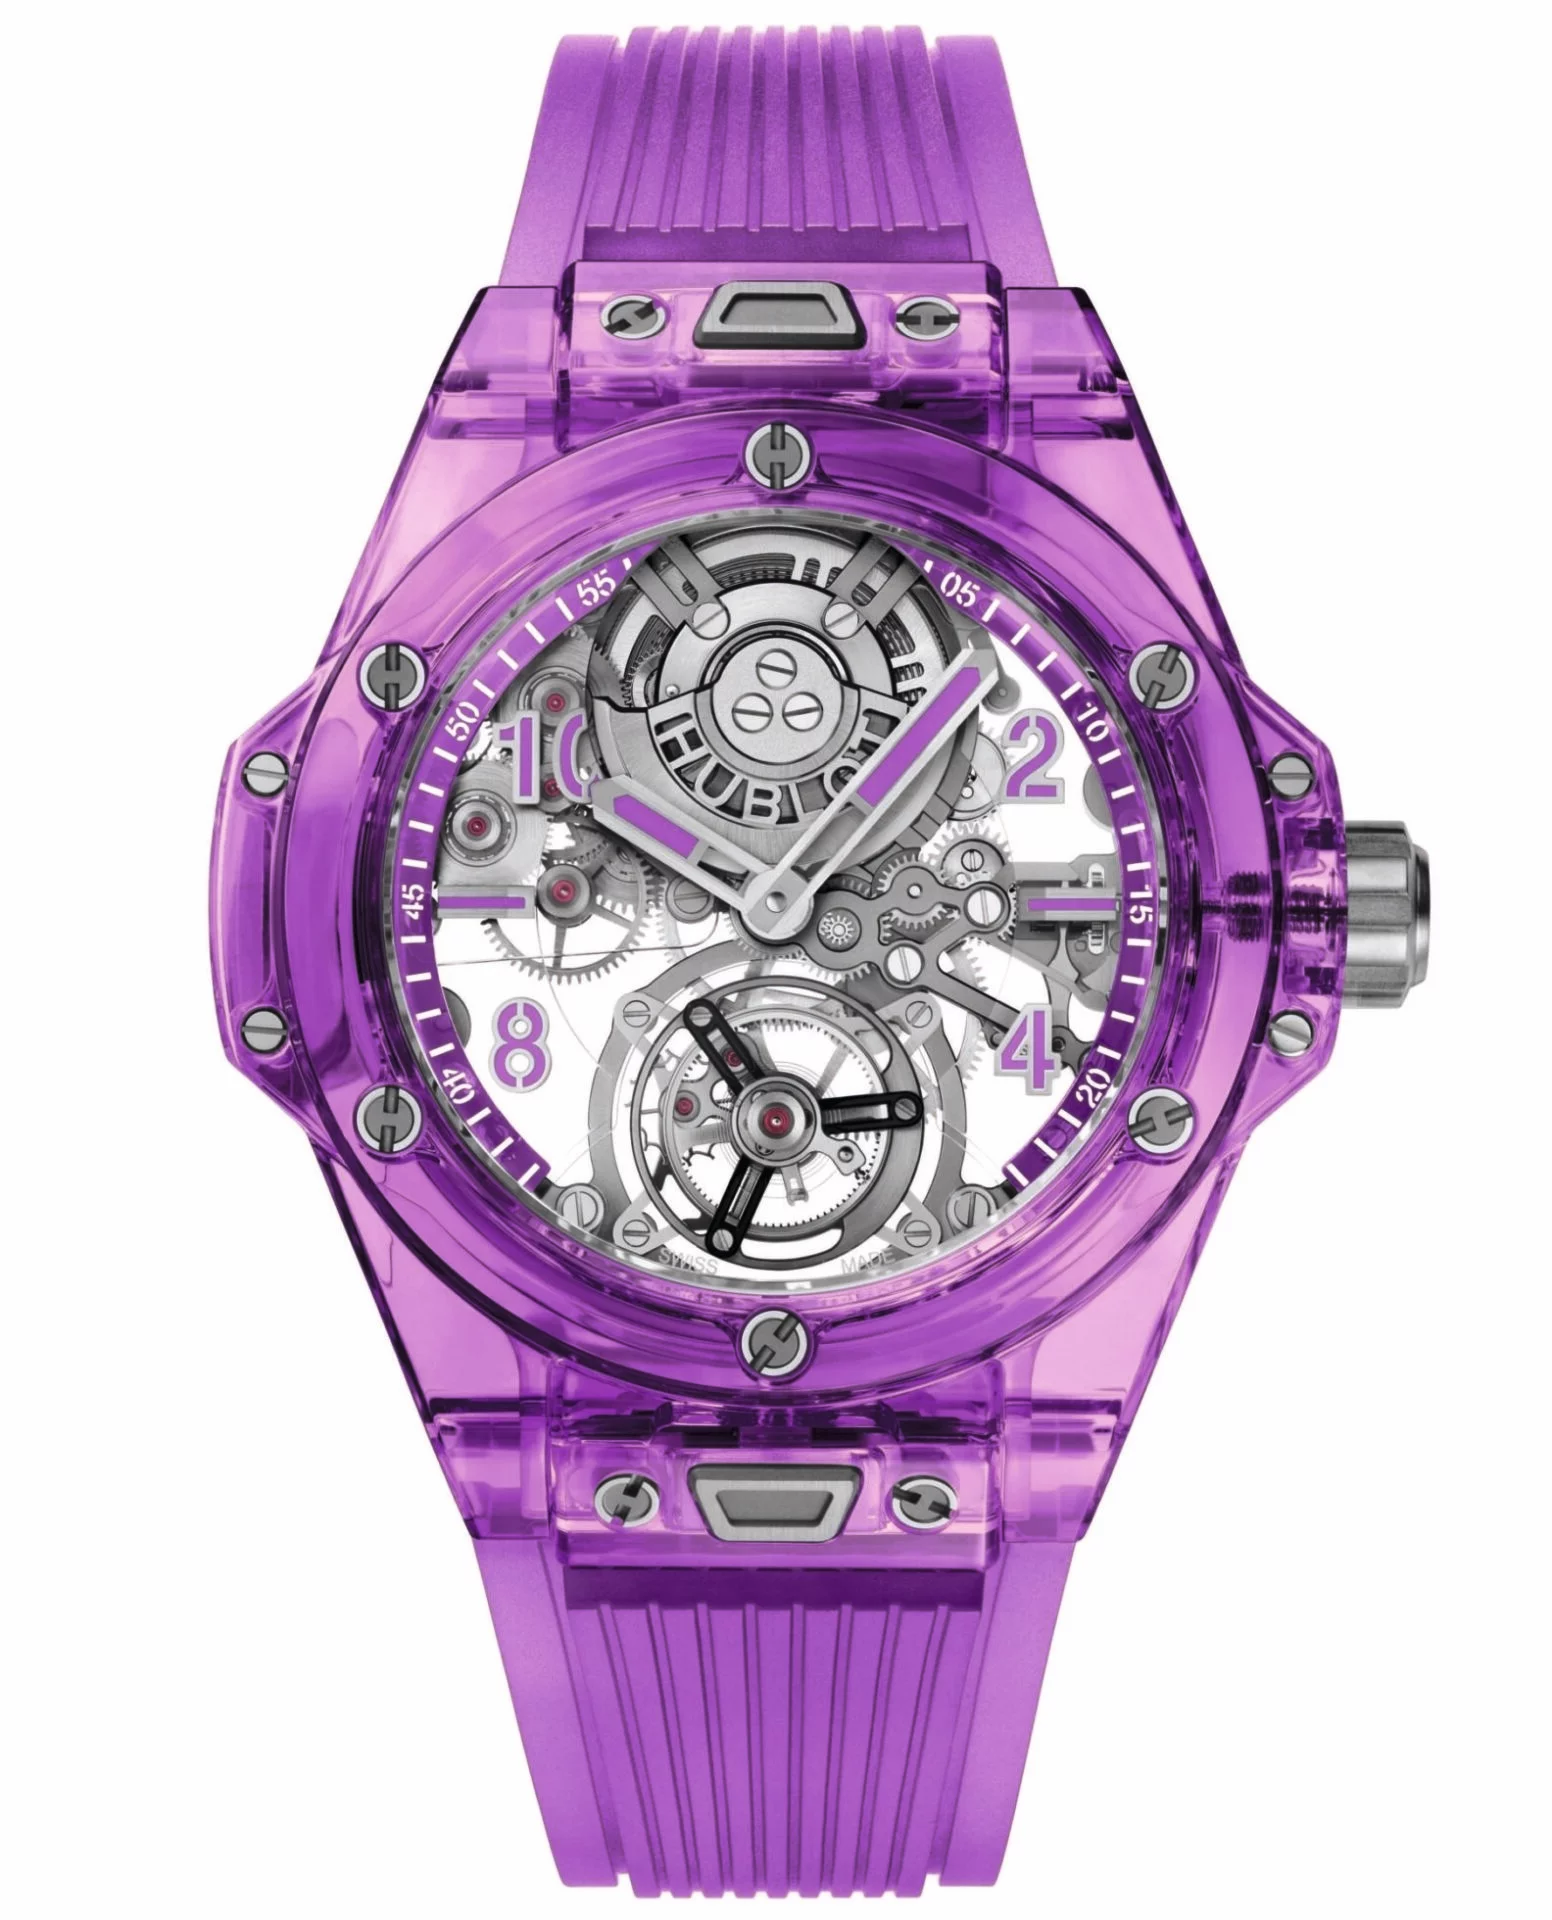 Watches & Wonders Edit: Hublot unveils new models of its iconic